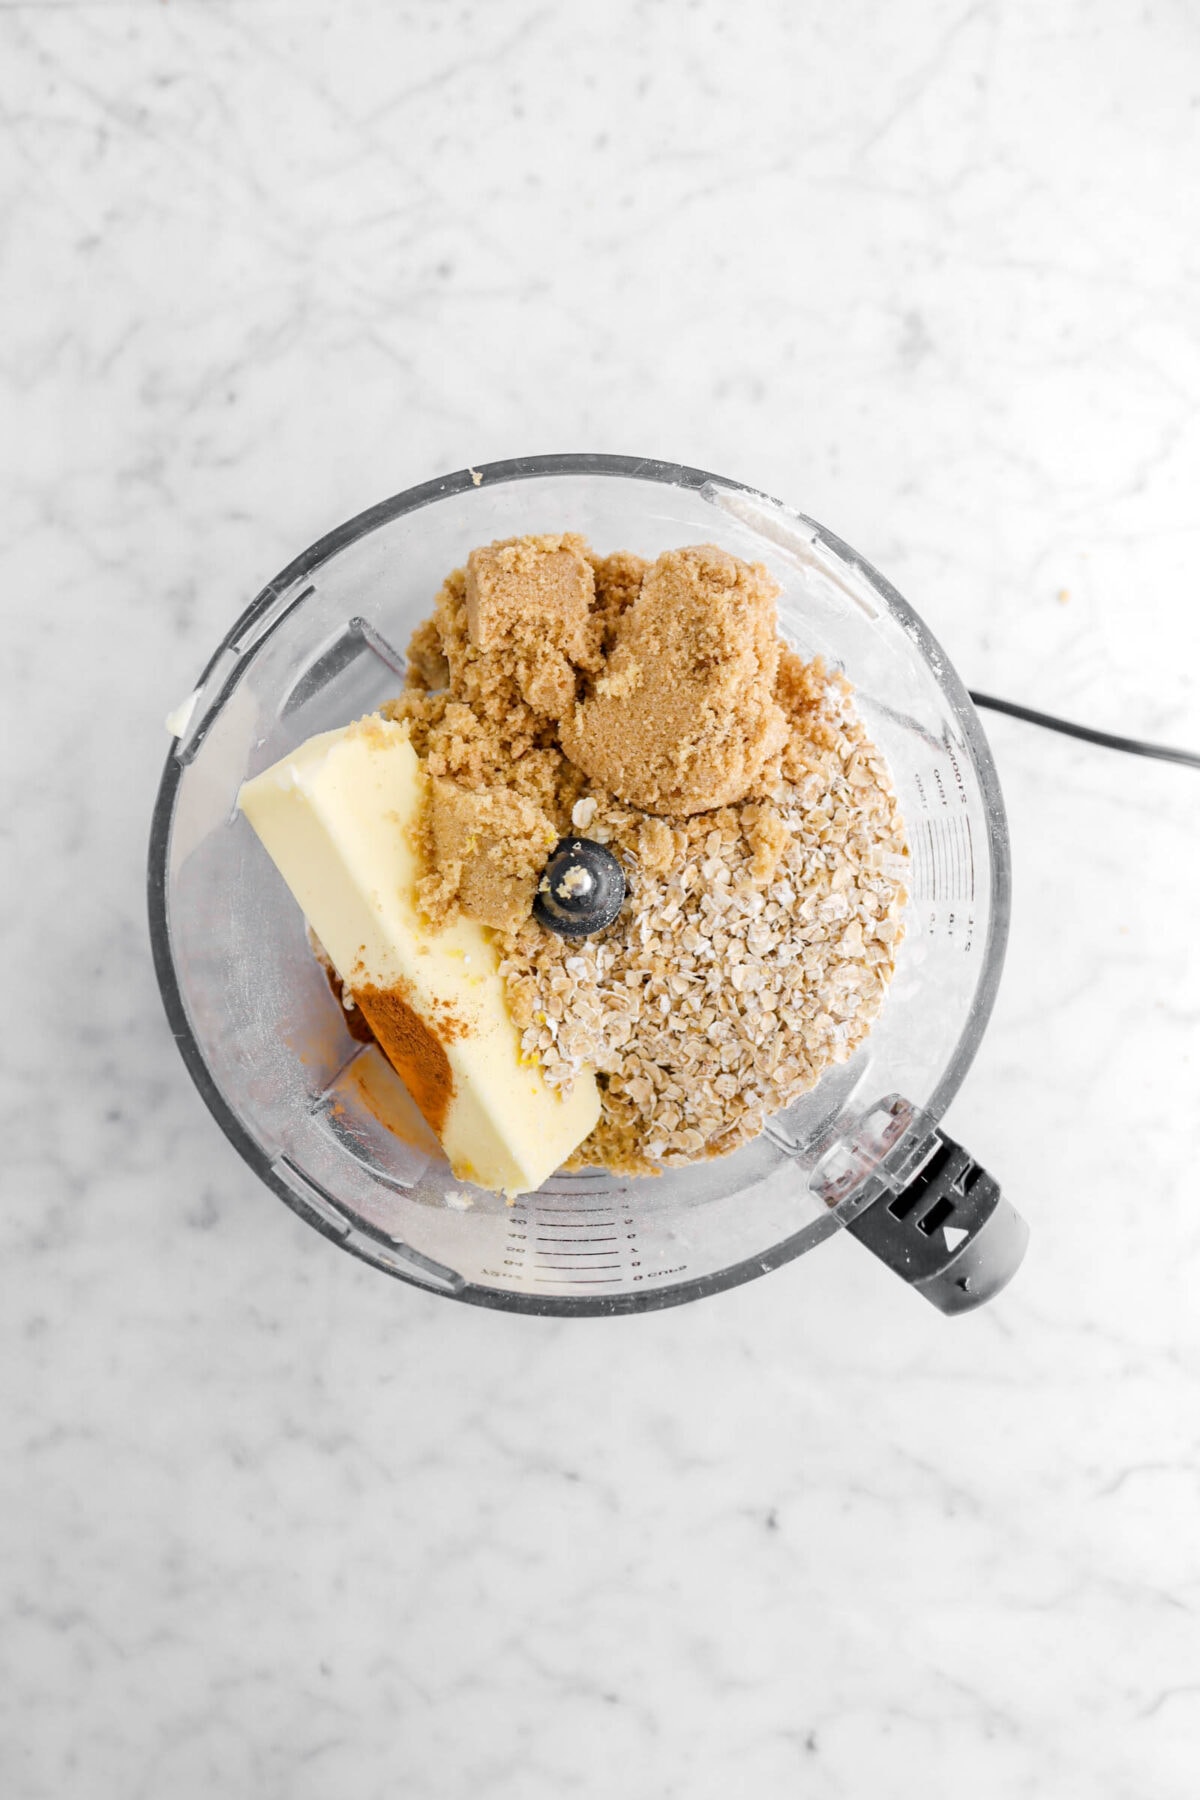 butter, cinnamon, brown sugar, and oats in food processor.